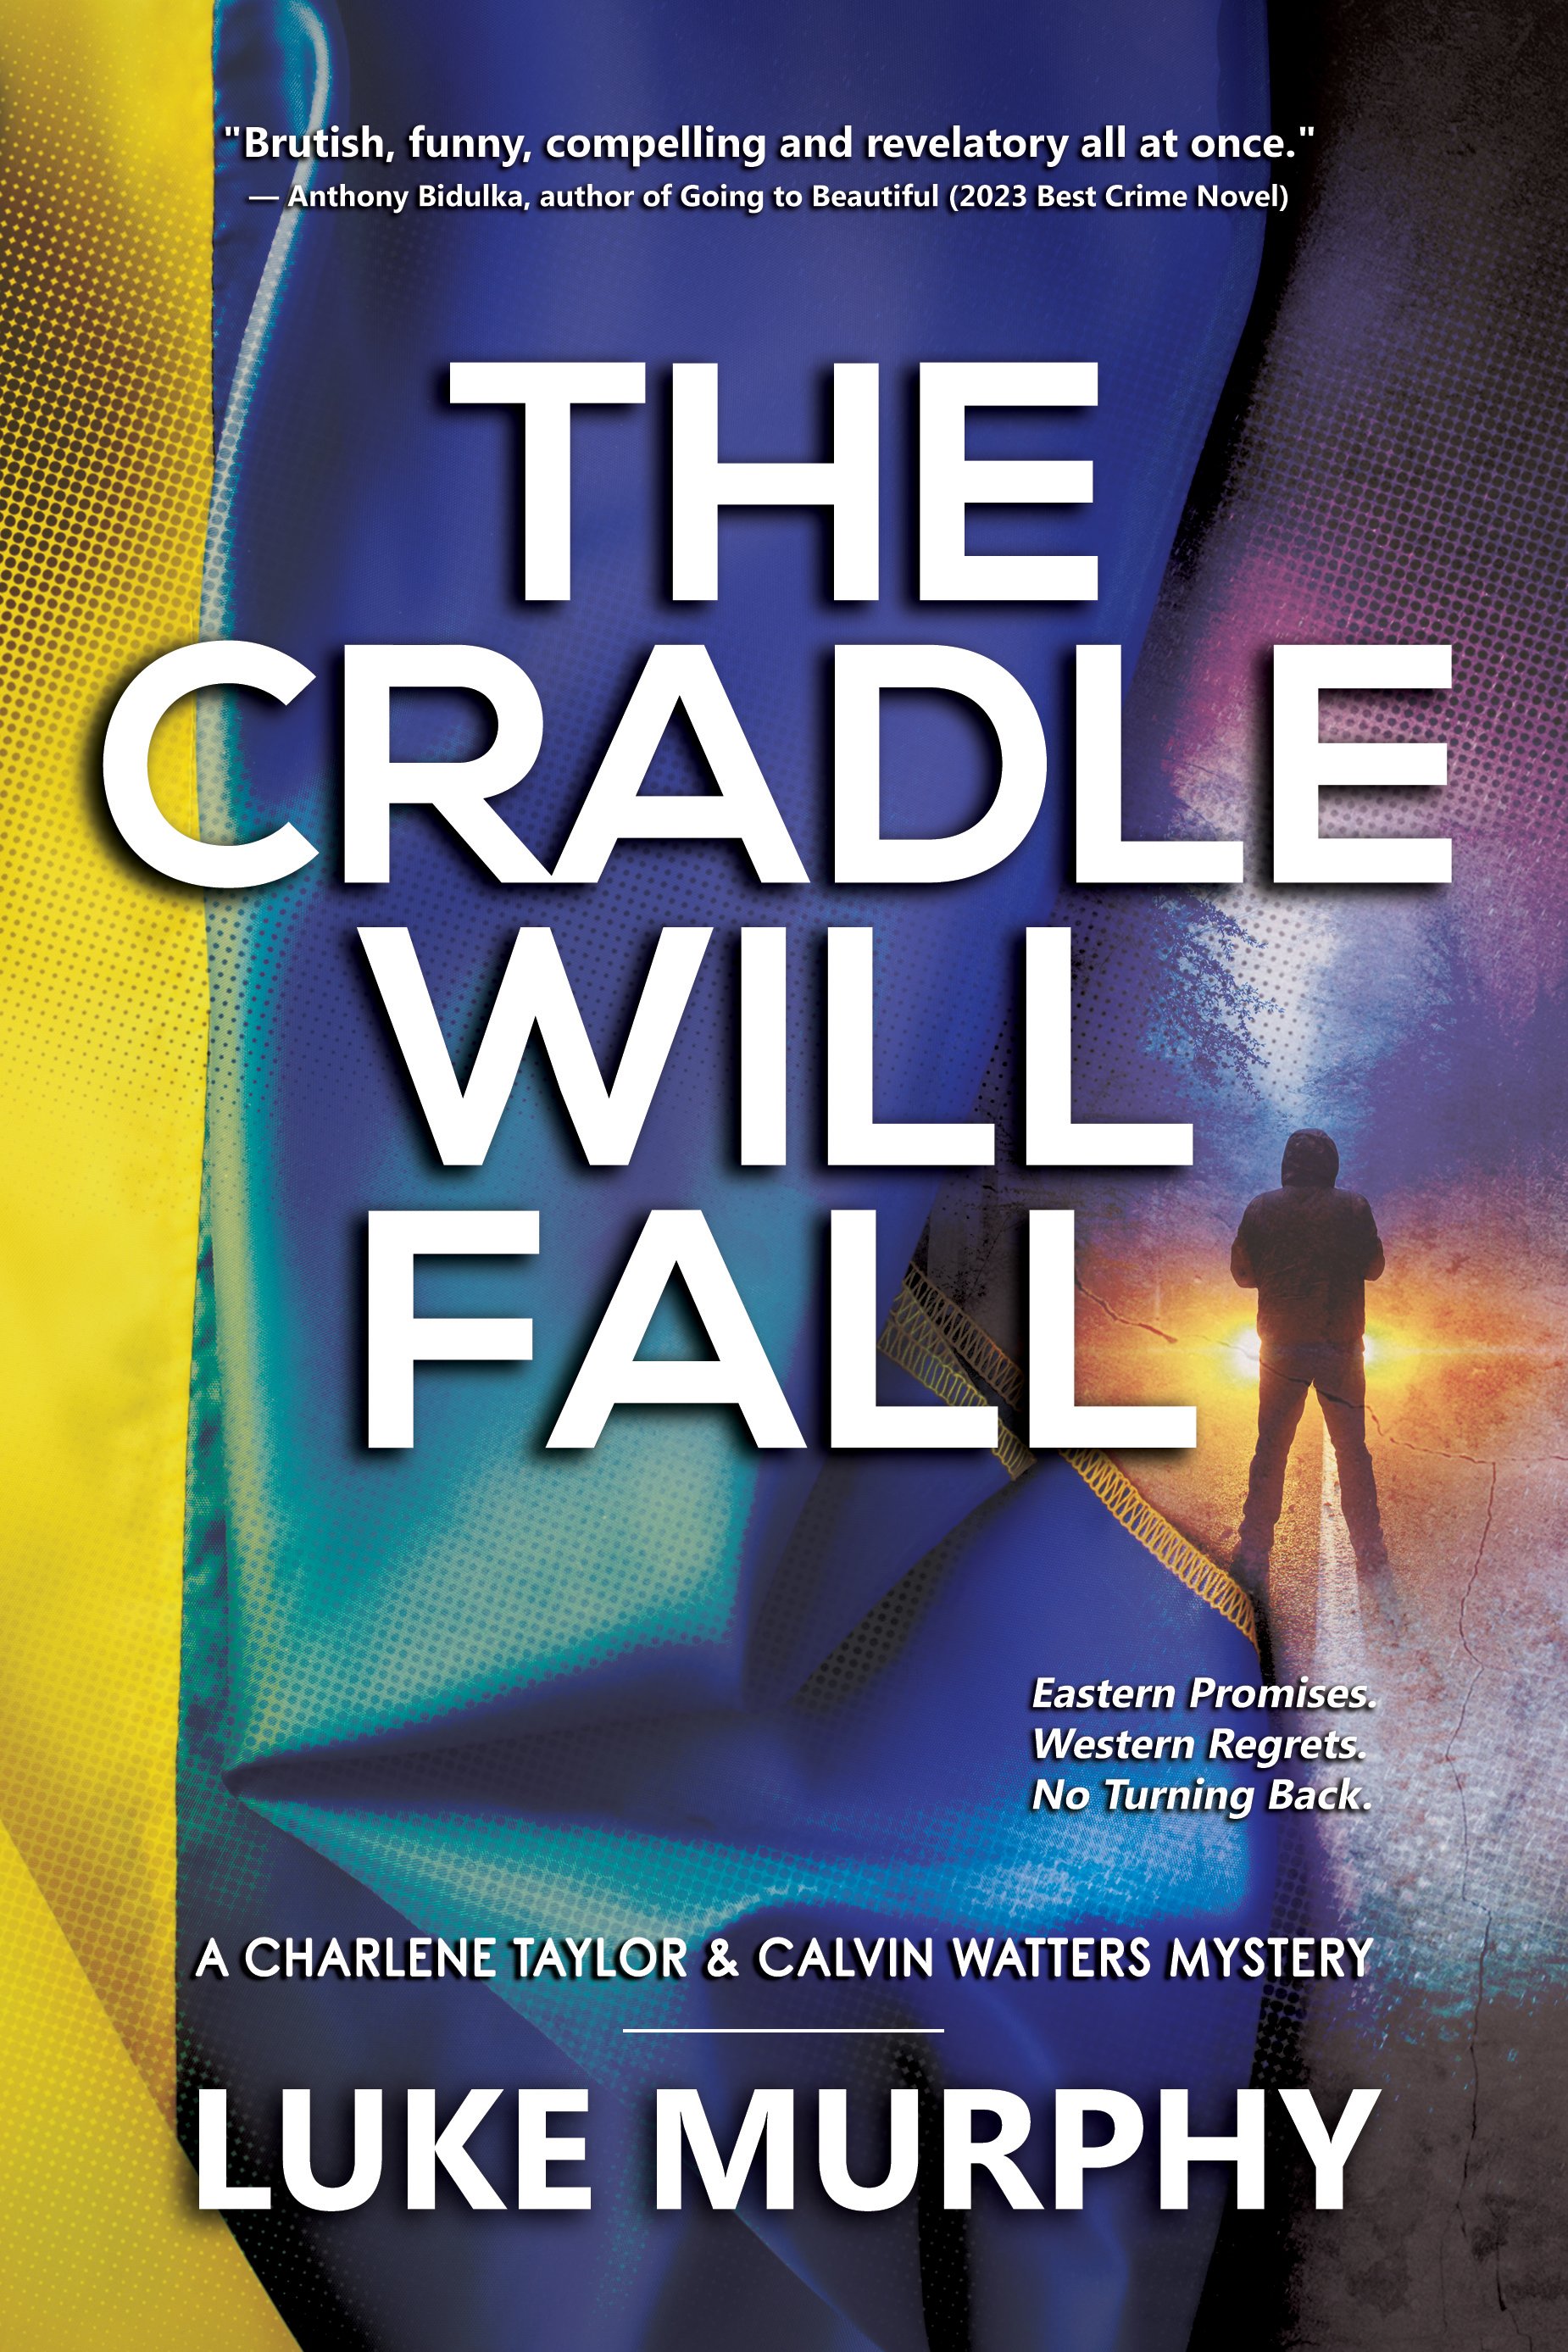 101ca Lukes Book Amazon Layout - The Cradle Will Fall - Final Front Cover (2).jpg (Copy) (Copy) (Copy)